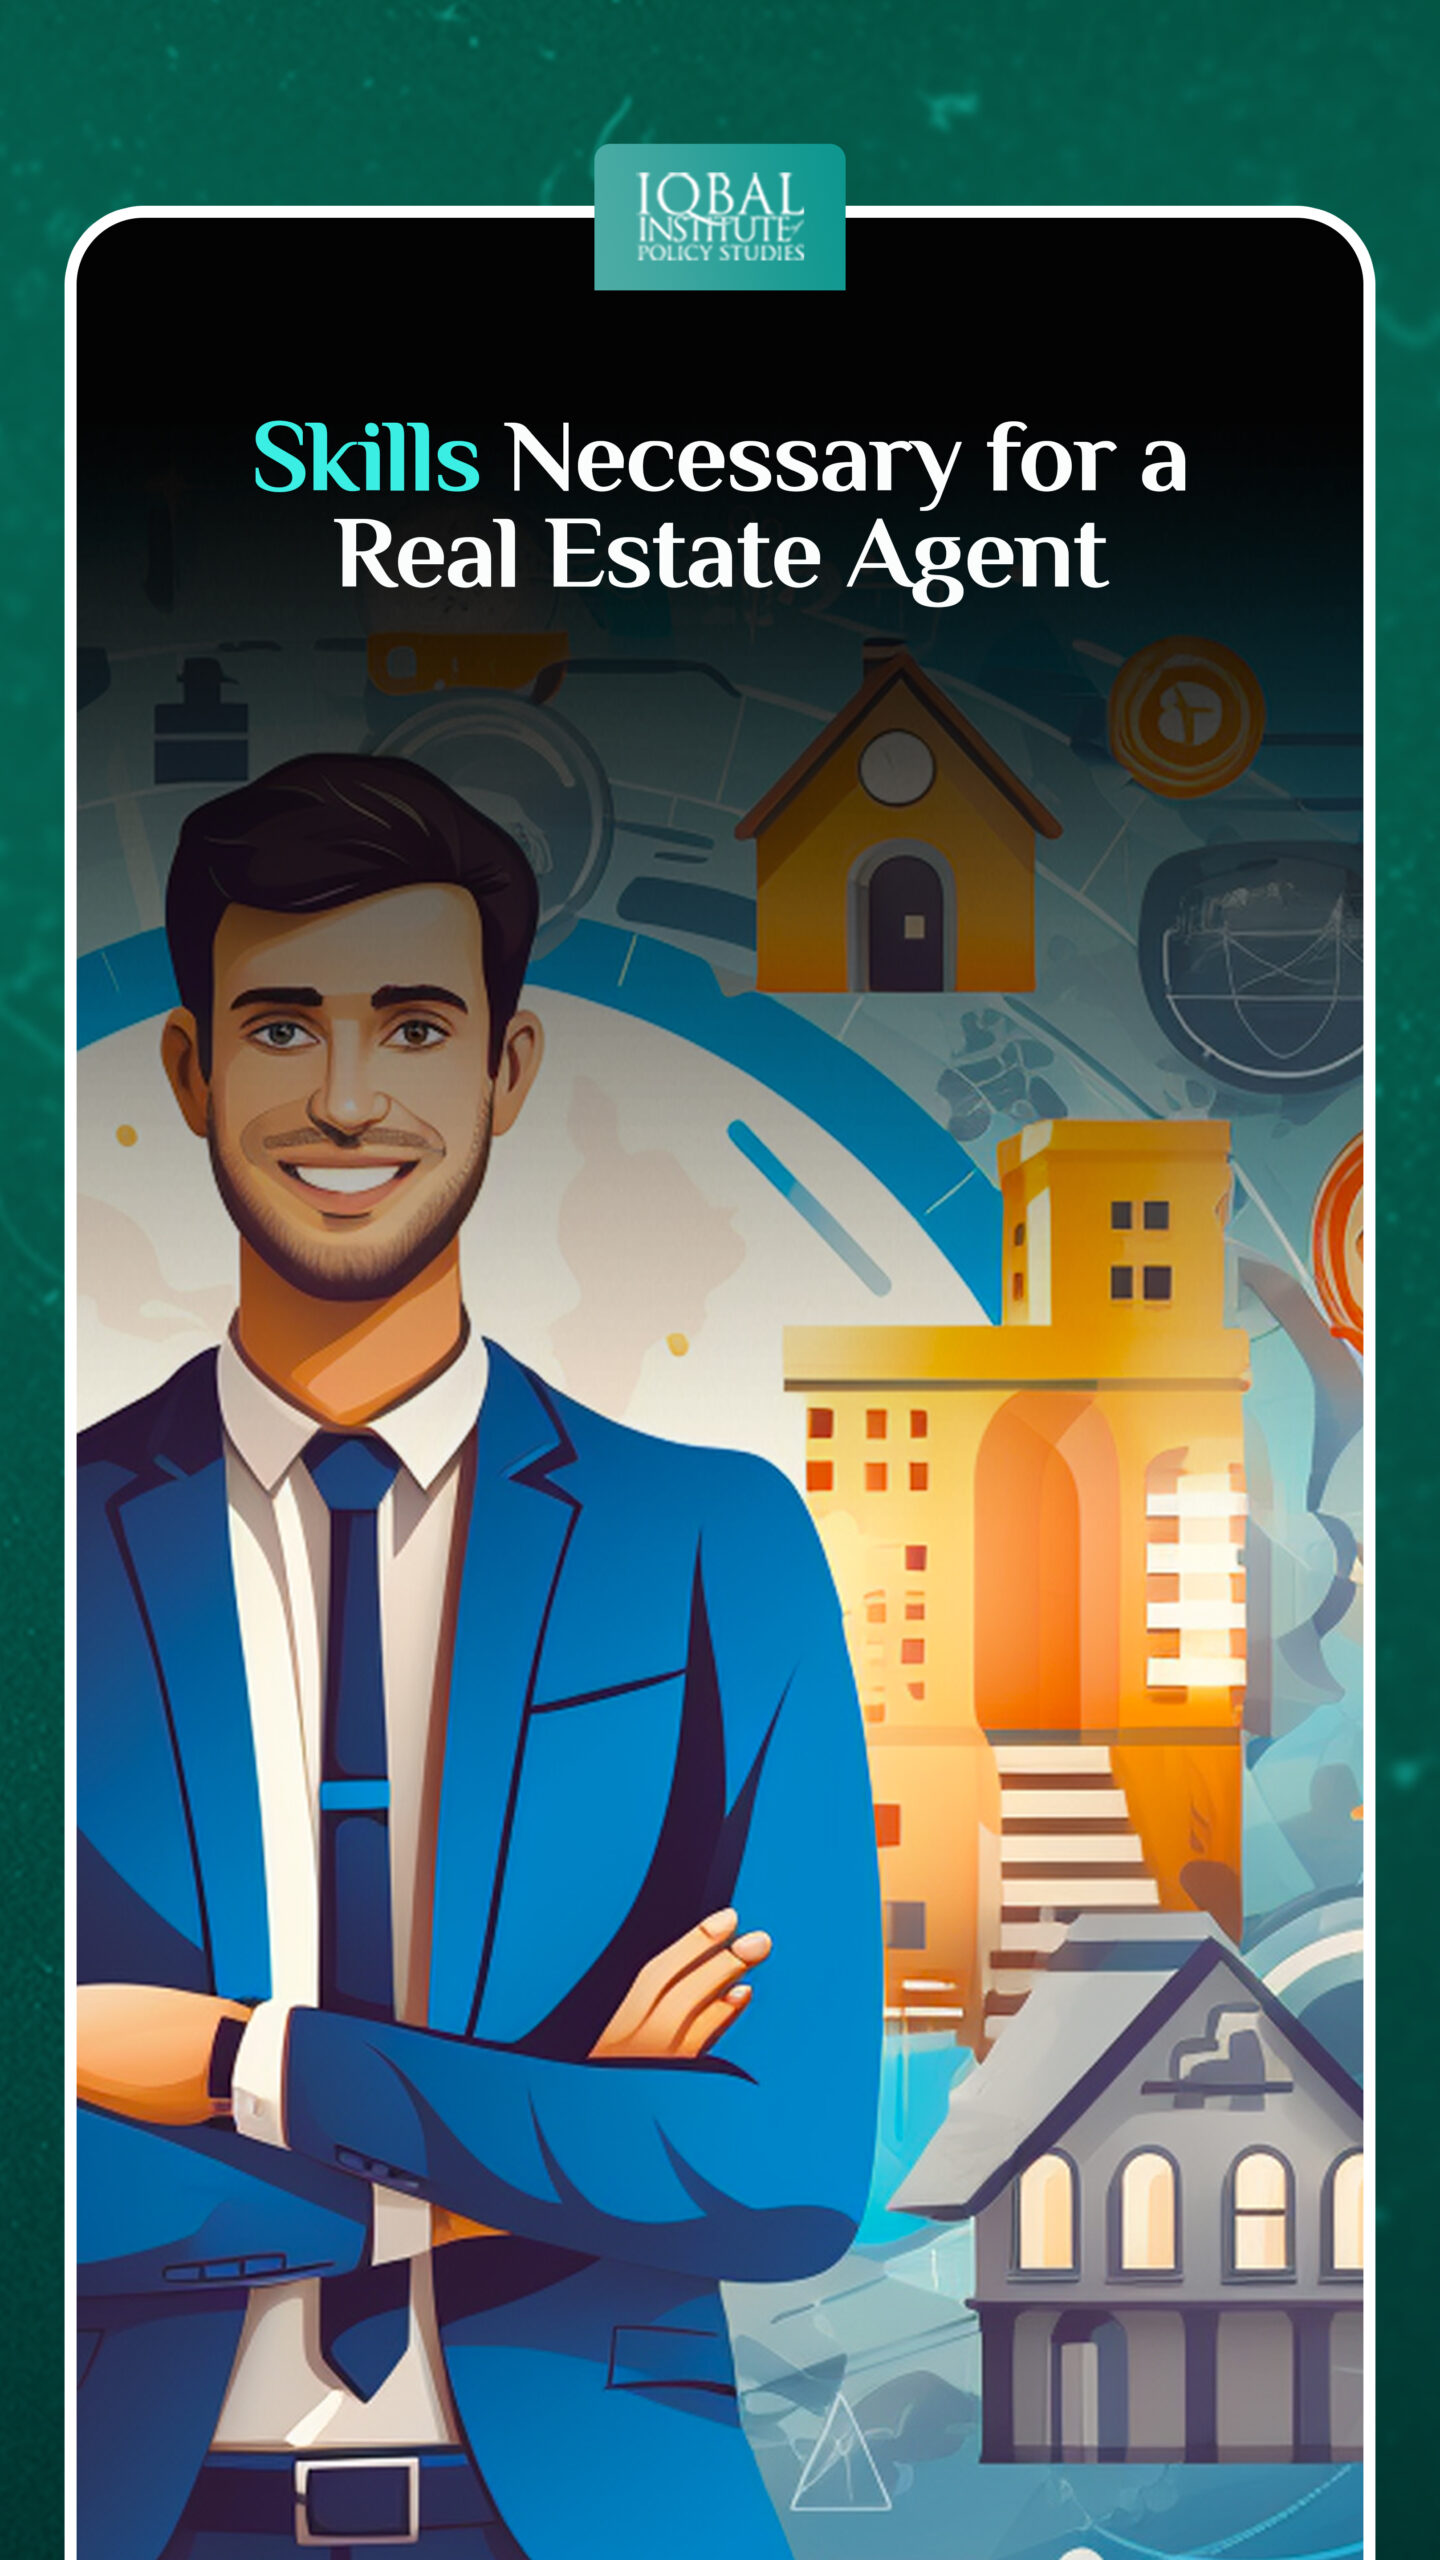 Real Estate Skills that are Necessary for a Real Estate Agent